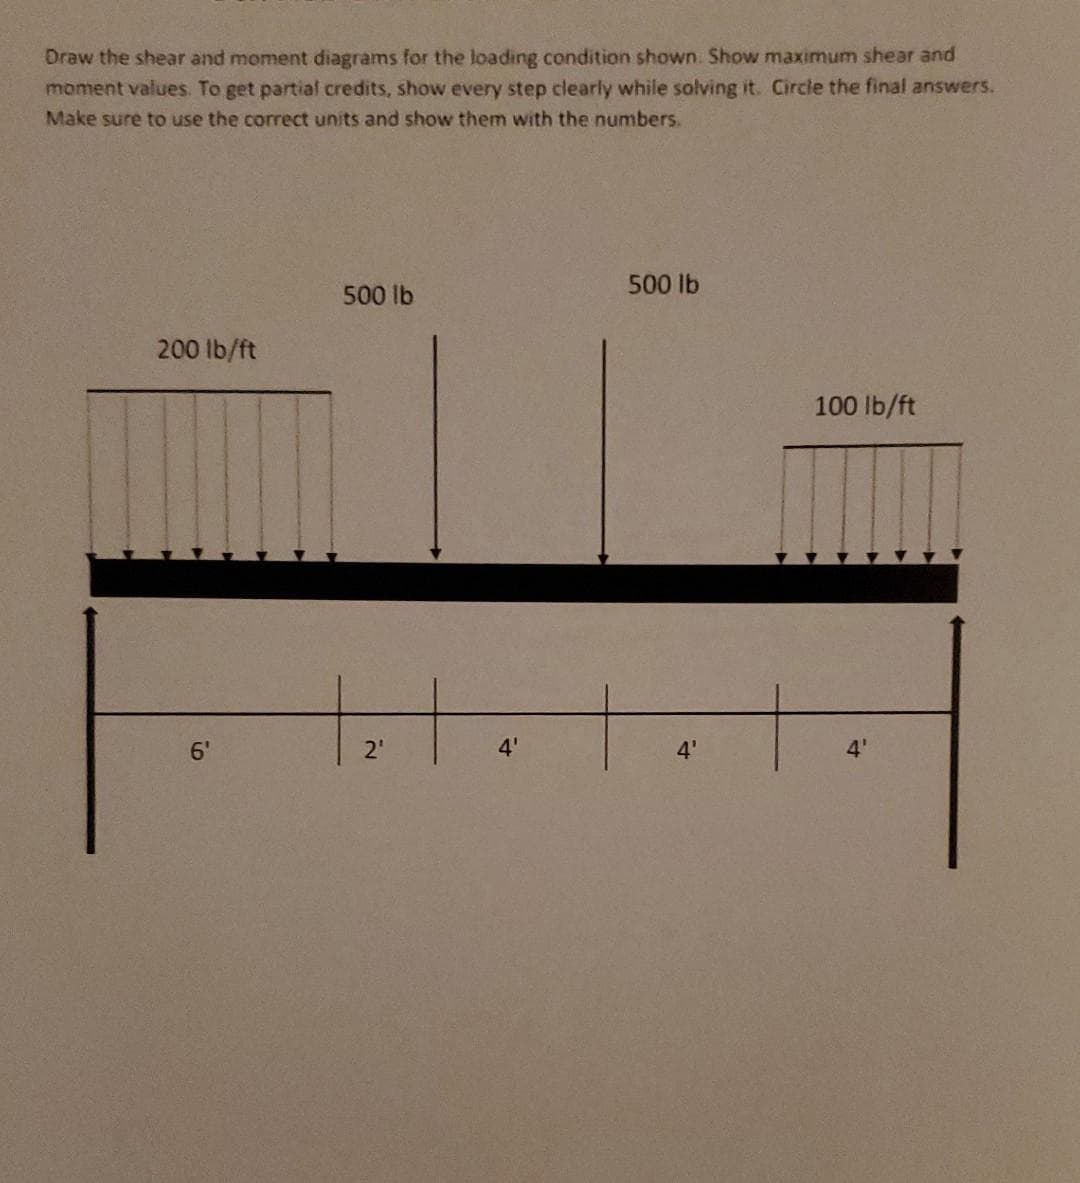 Draw the shear and moment diagrams for the loading condition shown. Show maximum shear and
moment values. To get partial credits, show every step clearly while solving it. Circle the final answers.
Make sure to use the correct units and show them with the numbers.
200 lb/ft
6'
9
500 lb
+₂1
2₁
4'
500 lb
4'
100 lb/ft
4'